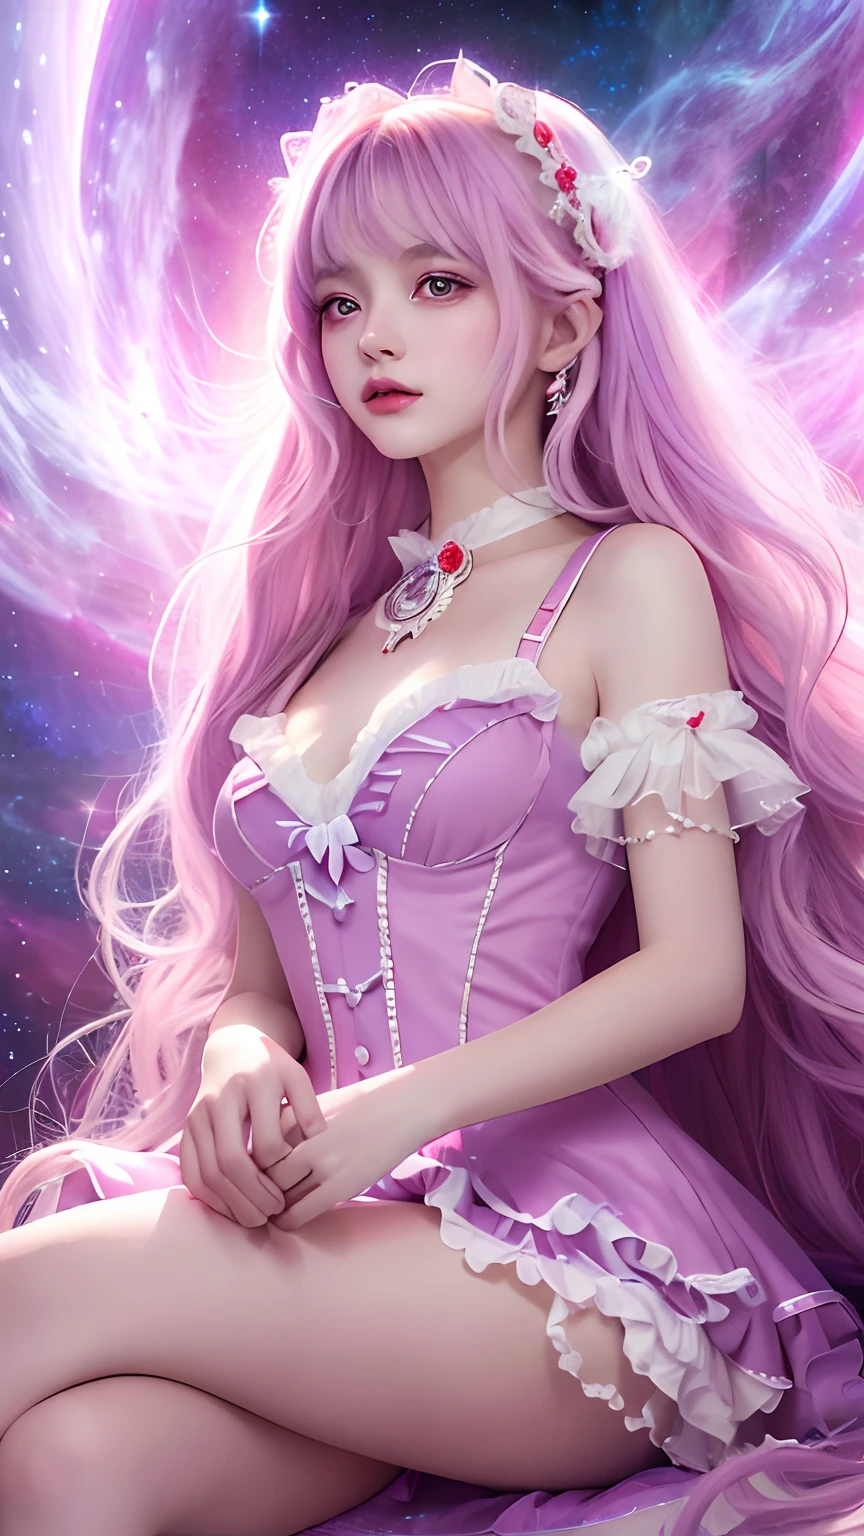 4K Ultra HD, Masterpiece, A girl with a magical aura, Good face, Long hair, shinny hair, Detailed eyes, Glossy lips, Wearing a red Lolita costume, The aura around the body, Magical effect, Spread white light, Cosmic elements and ethereal atmosphere, A mix of bright lights and colorful nebulae, universe background, Sitting, Full body capture.